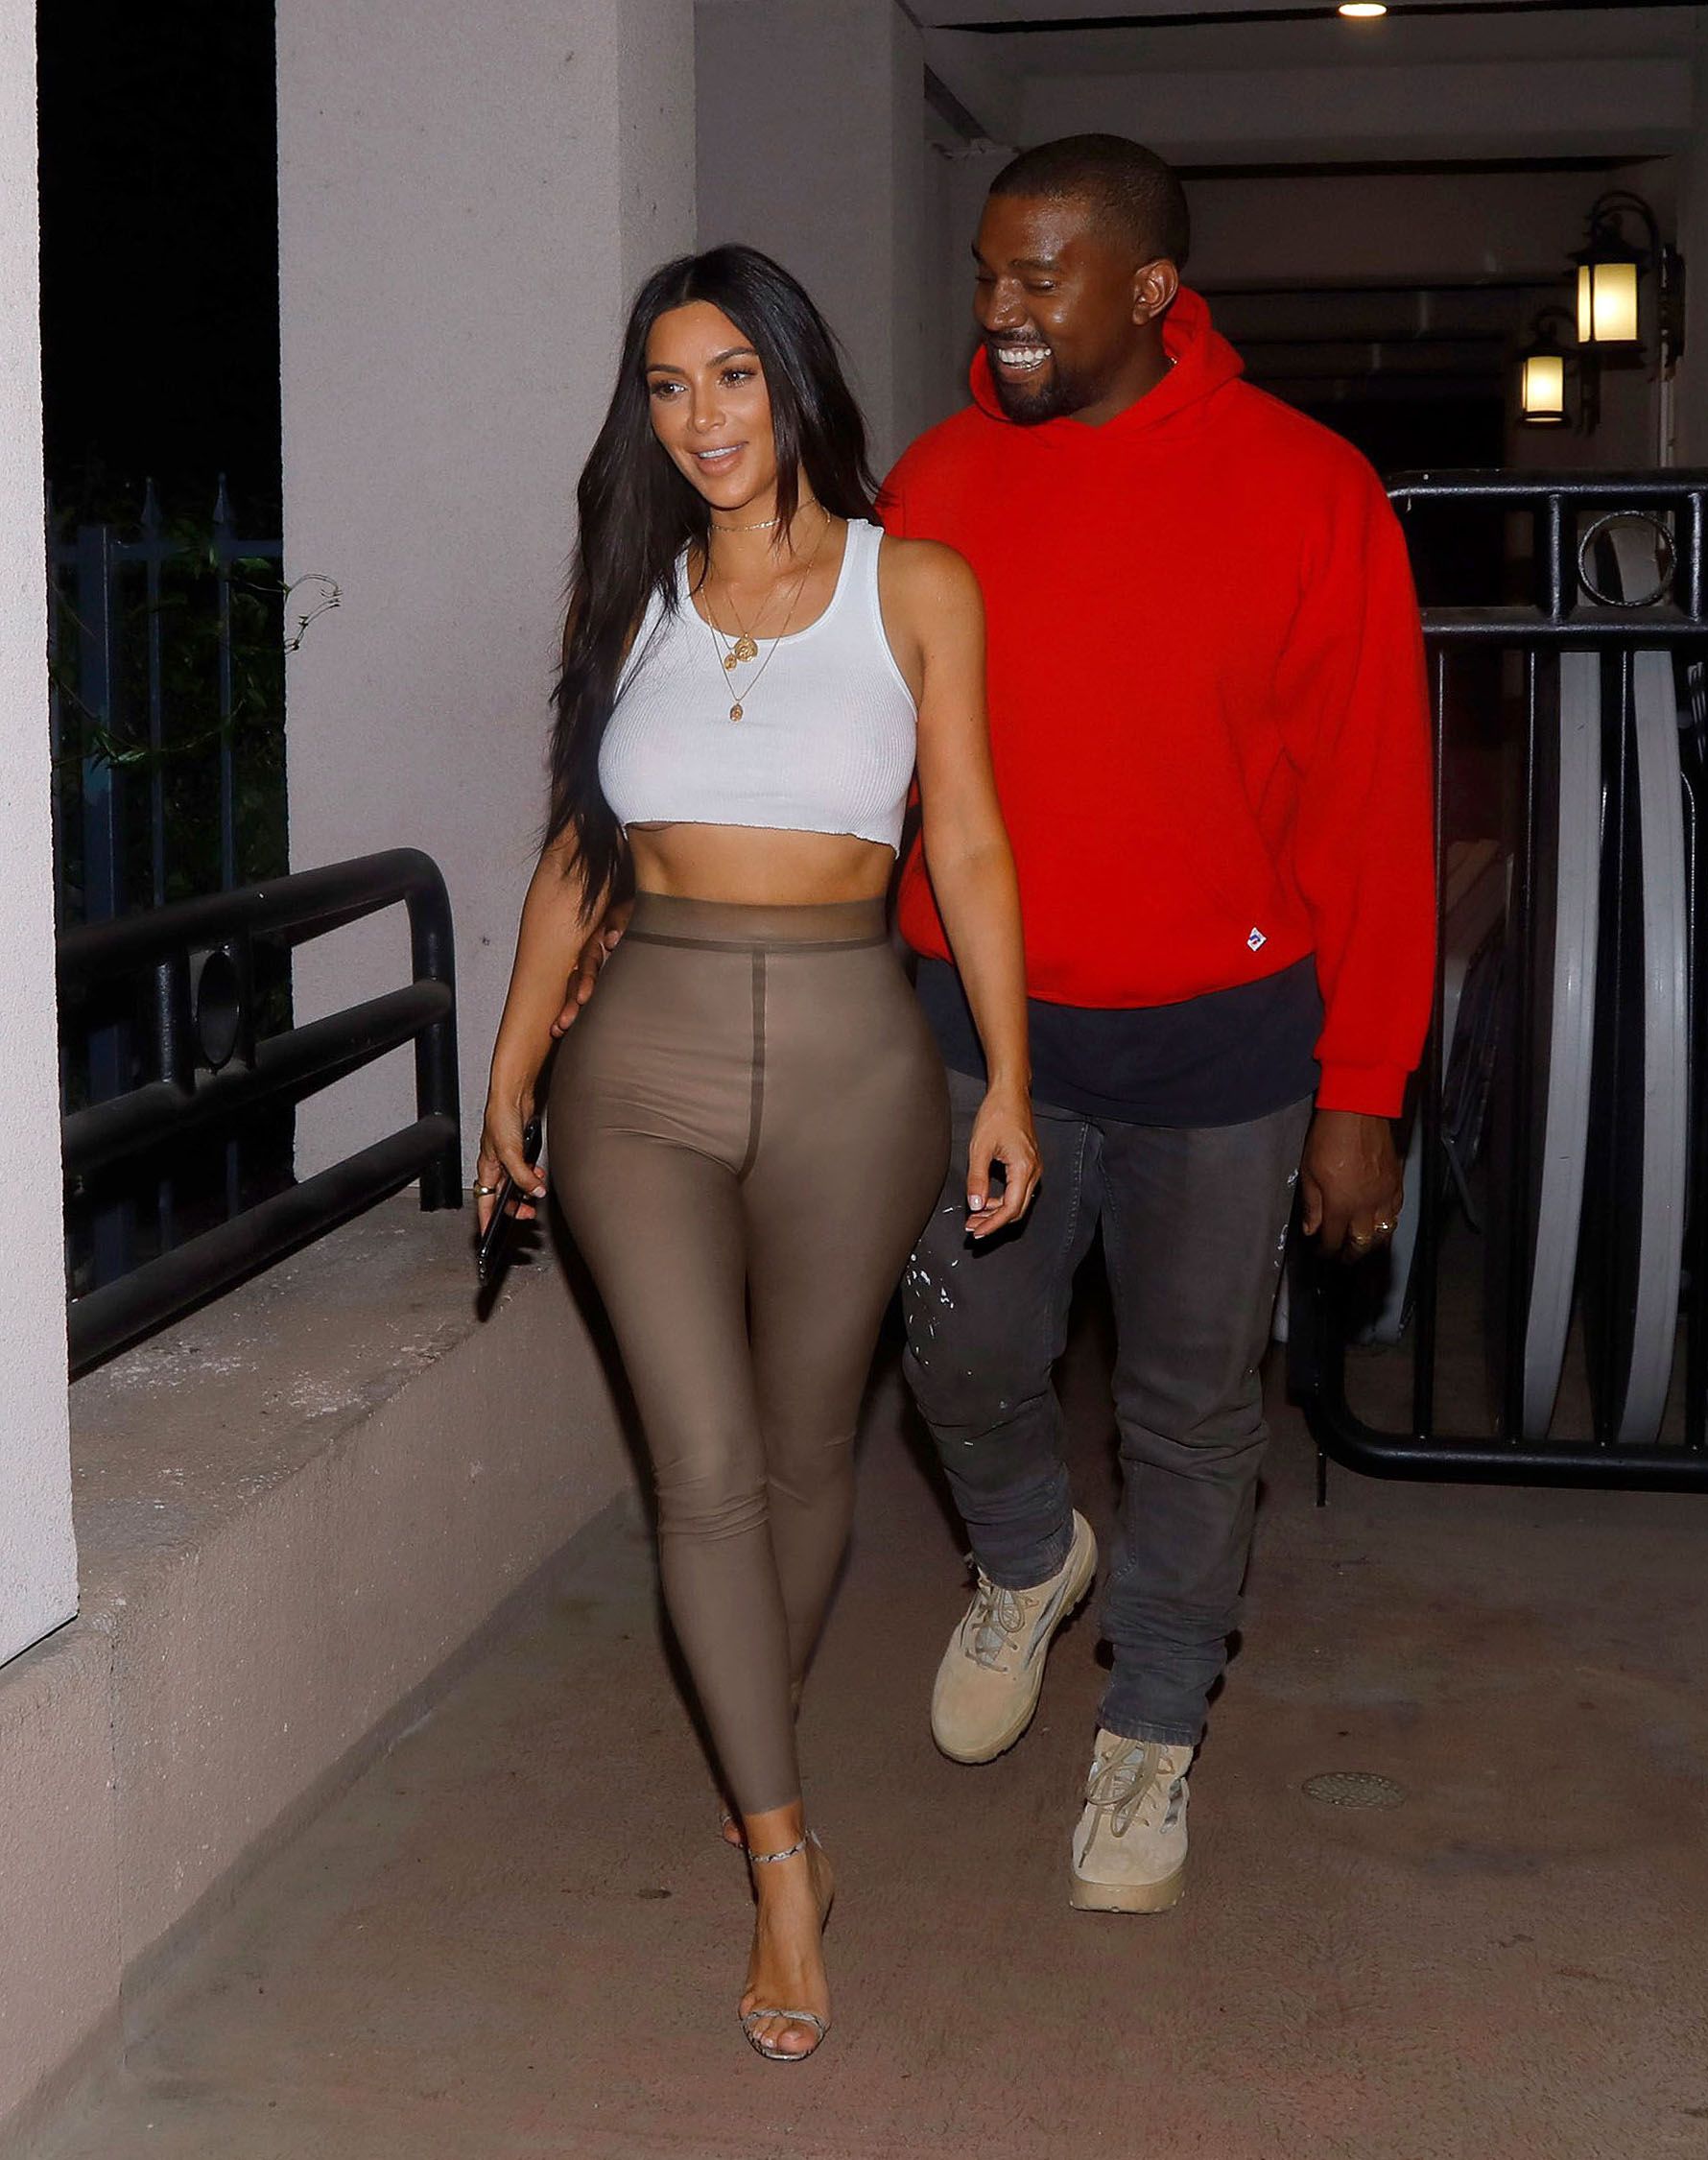 Kim Right Boob Tried to Make Break for It on Night With Kanye